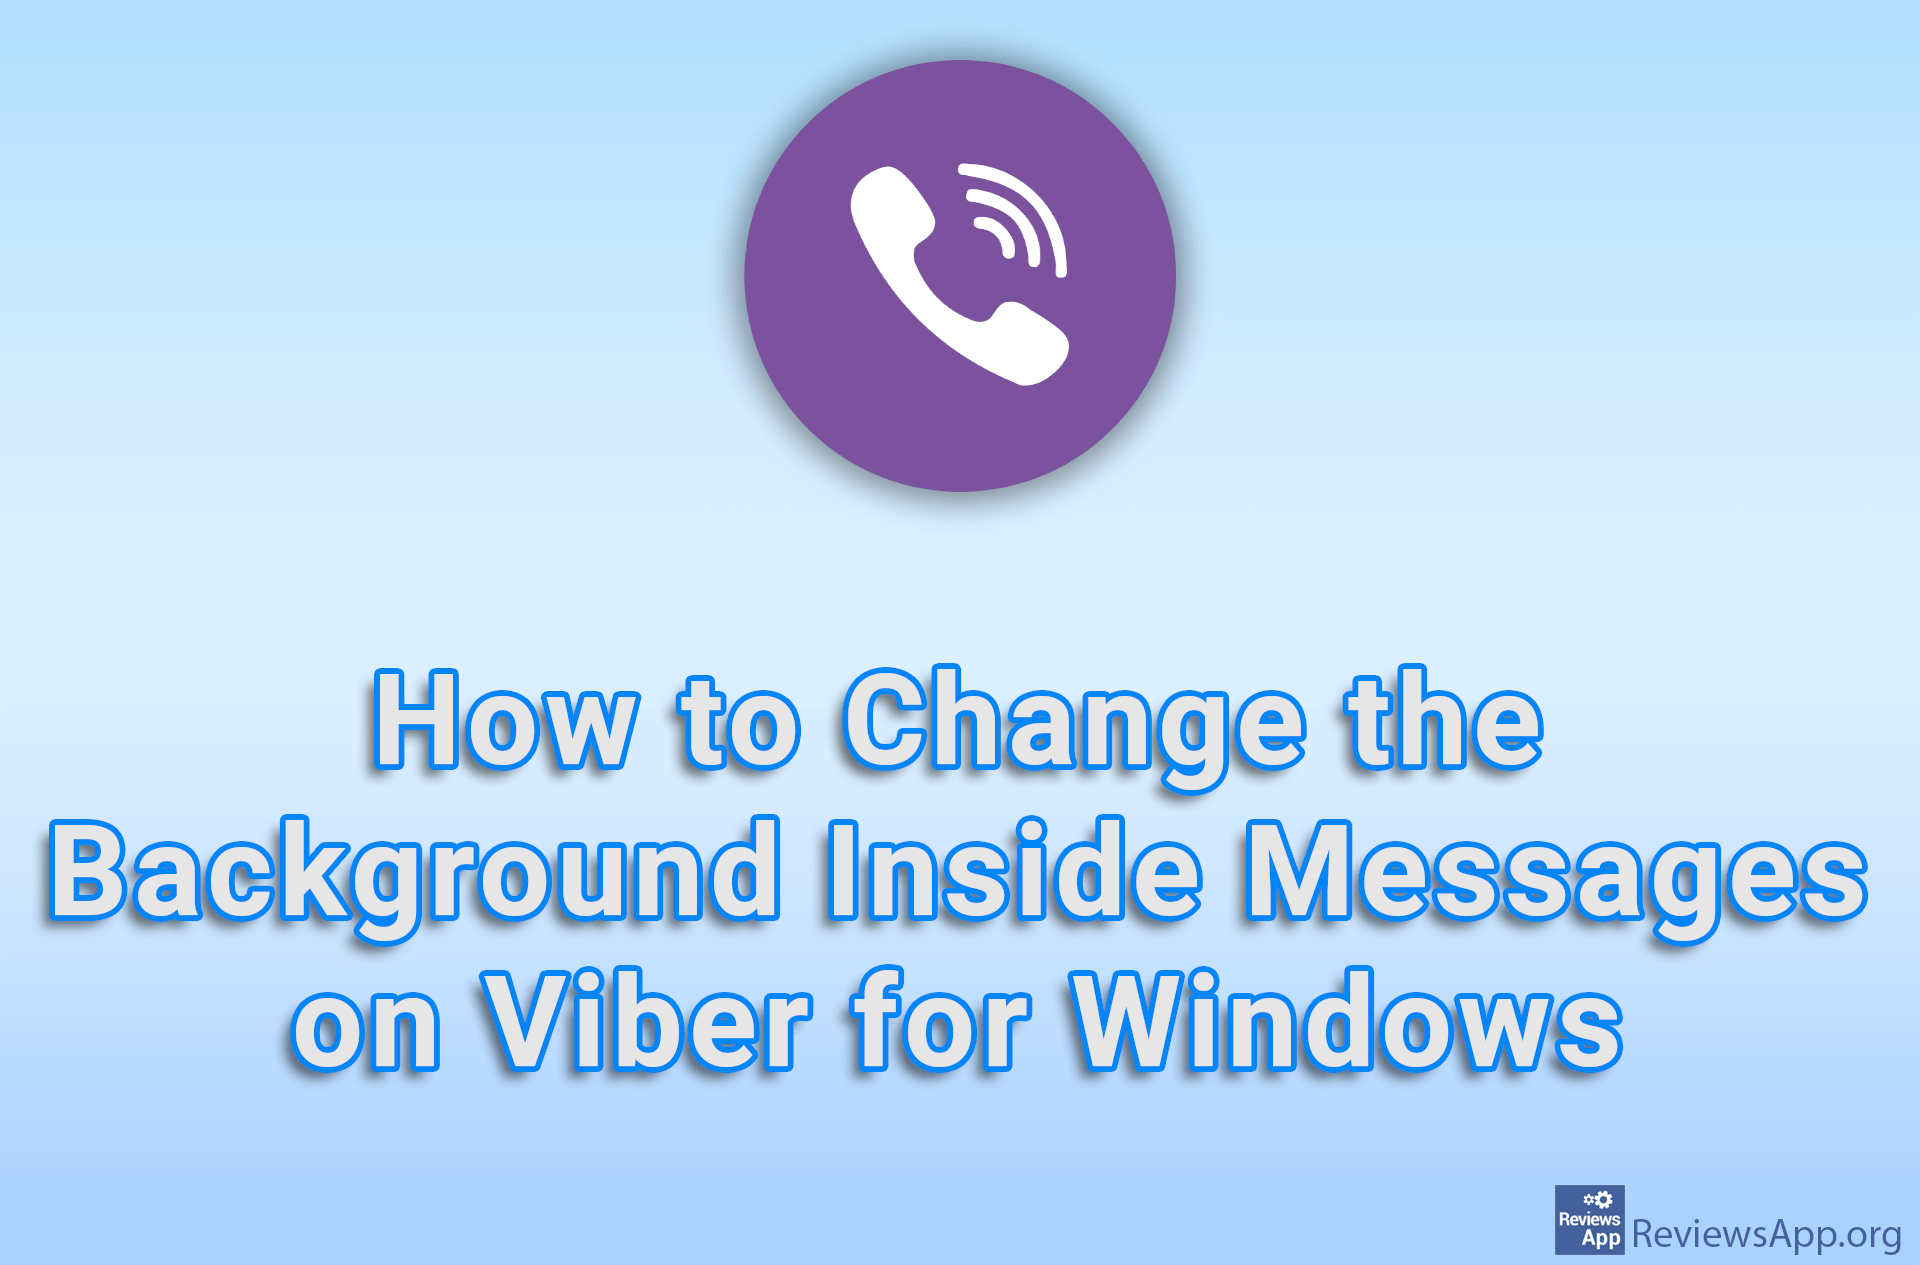 How to Change the Background Inside Messages on Viber for Windows